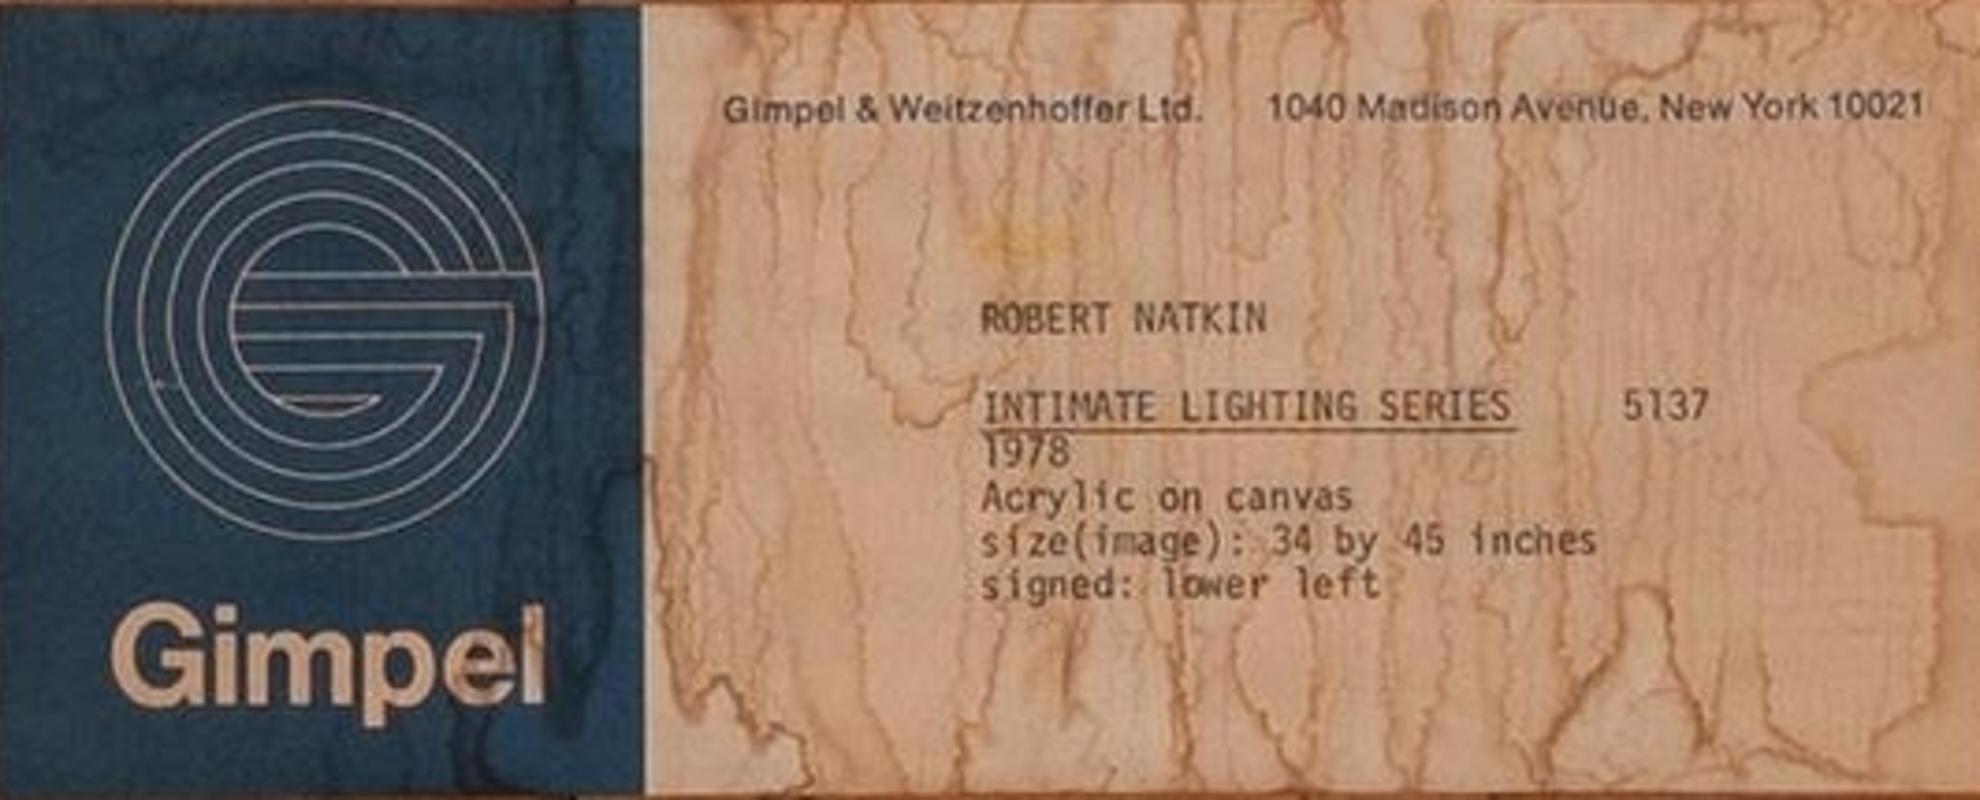 Robert Natkin (American, 1930 - 2010)
Intimate Lighting Series, 1978
Acrylic on canvas
34 x 45 inches
Signed lower left

Provenance:
Gimpel & Weitzenhoffer Gallery, New York
Private Collection, Connecticut

Intimate Lighting is part of a series of